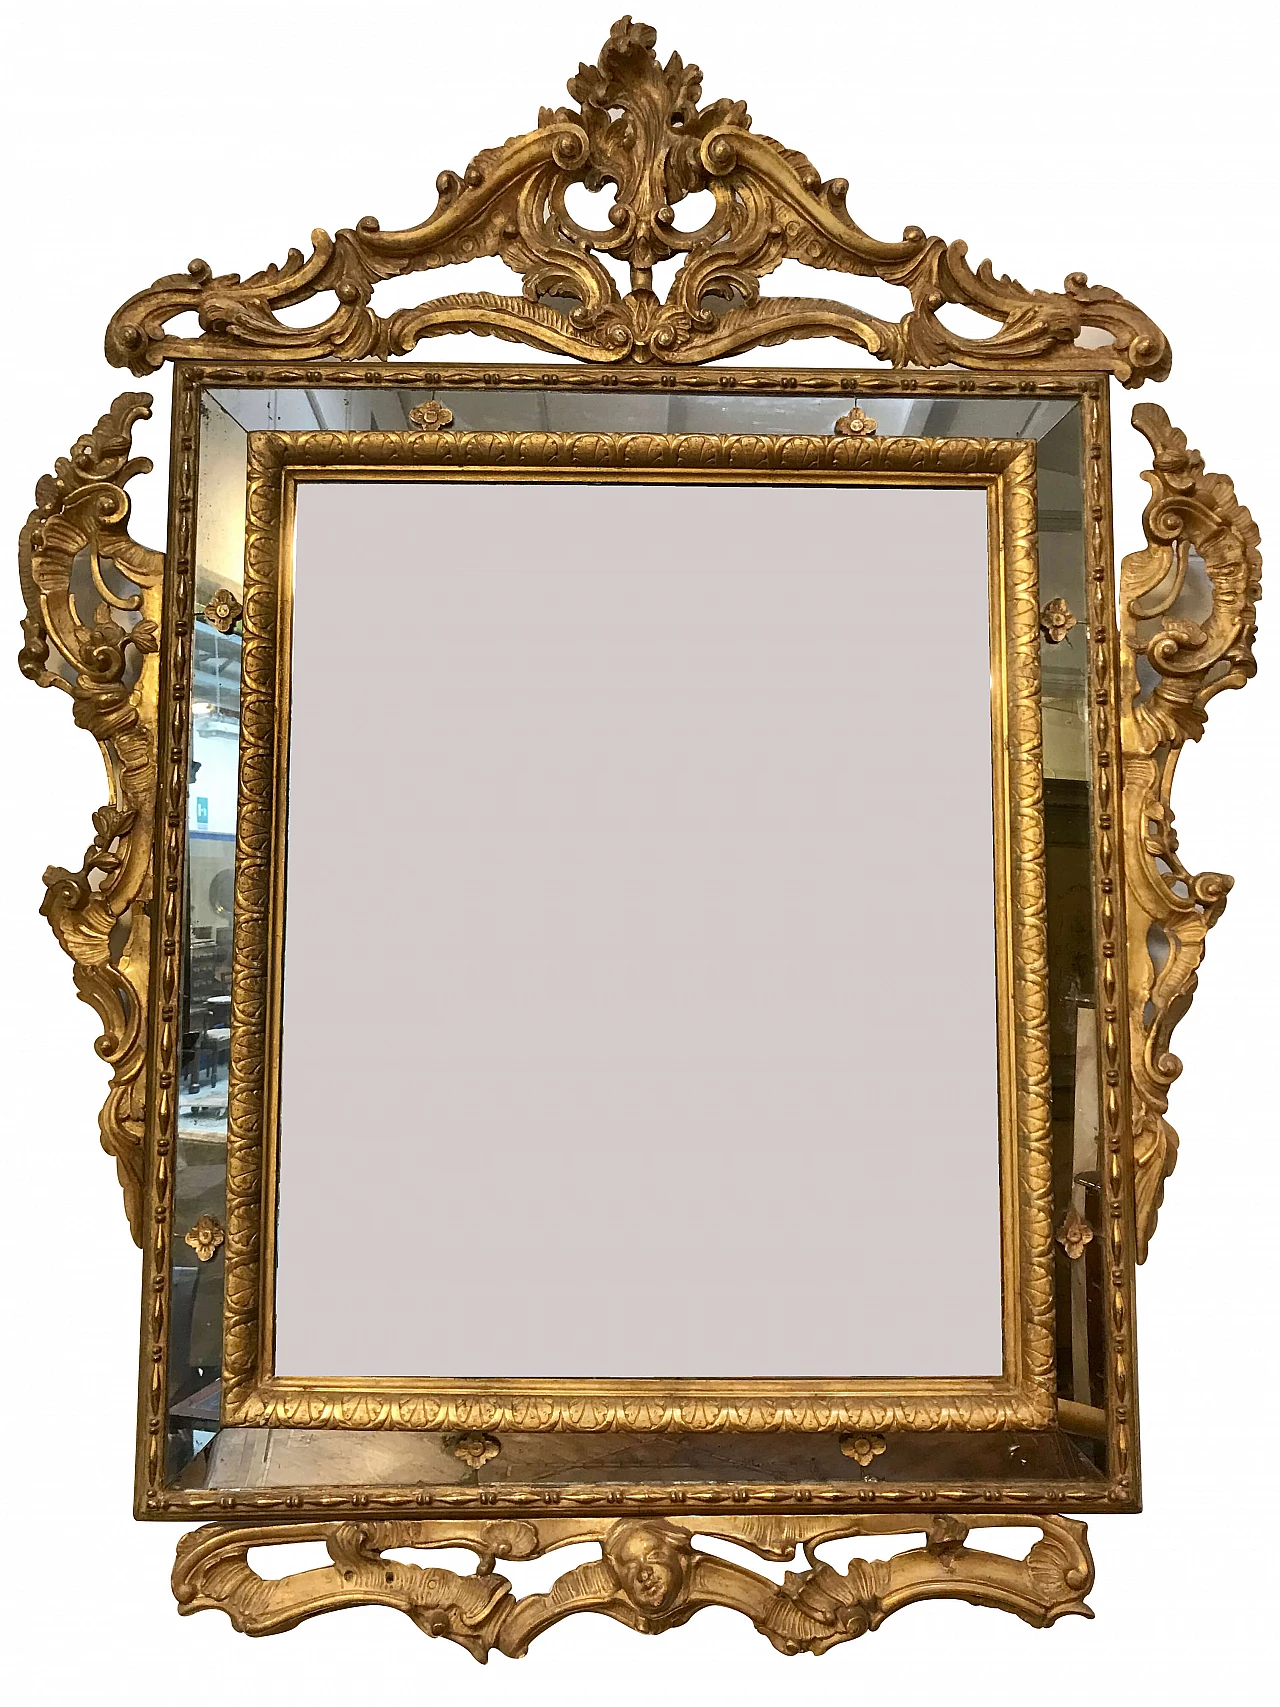 Louis XVI carved wood mirror, gilded with gold leaf, 18th century 1238950